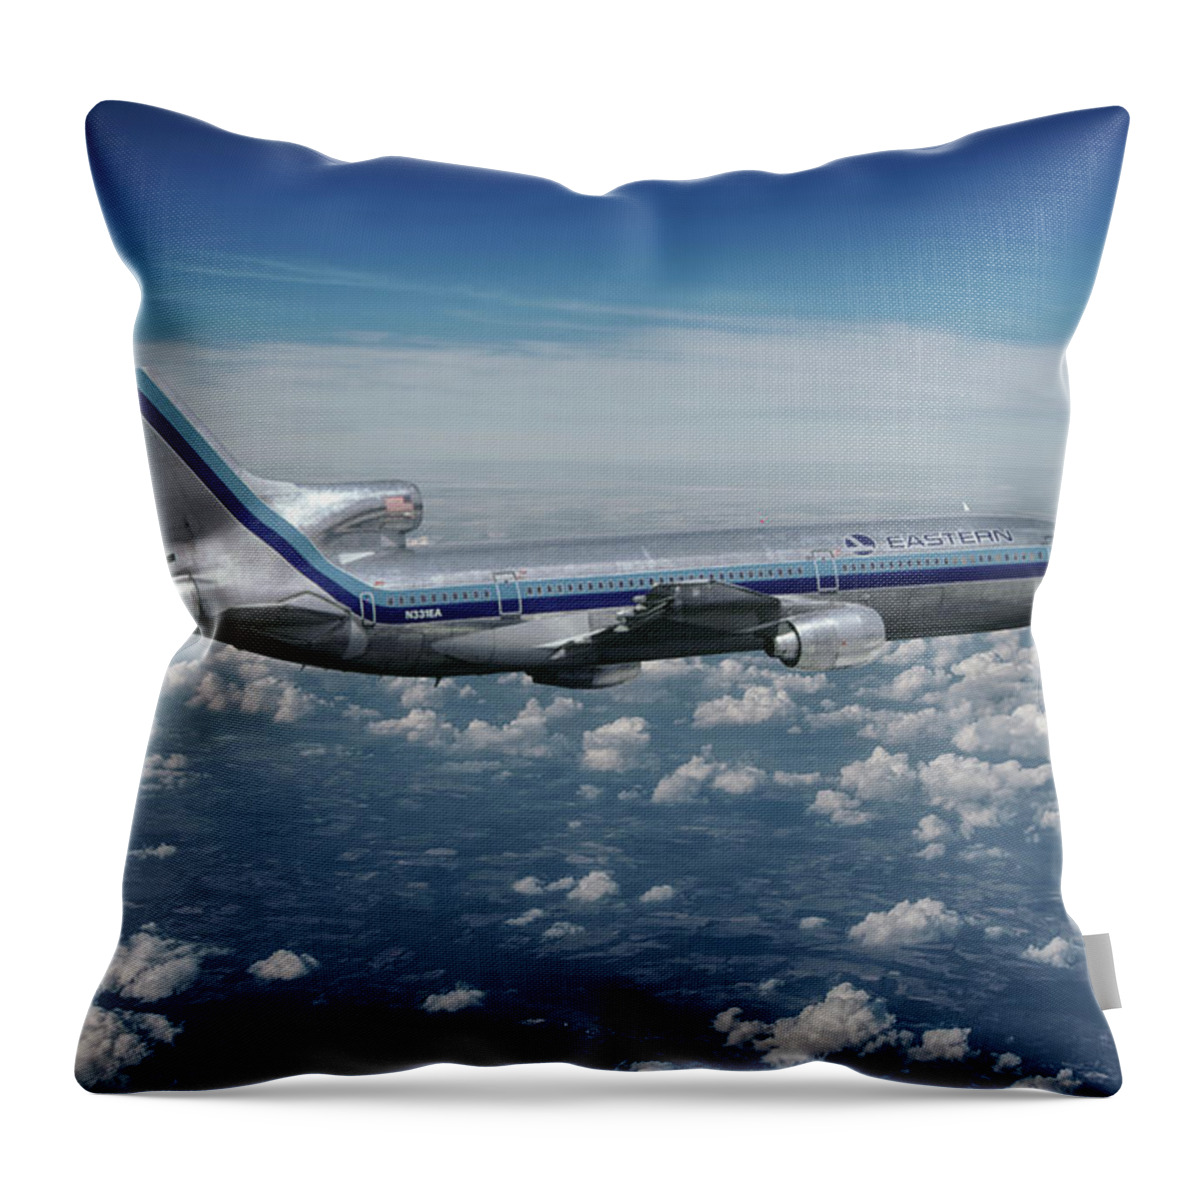 Eastern Airlines Throw Pillow featuring the mixed media Eastern Airlines L-1011 TriStar by Erik Simonsen